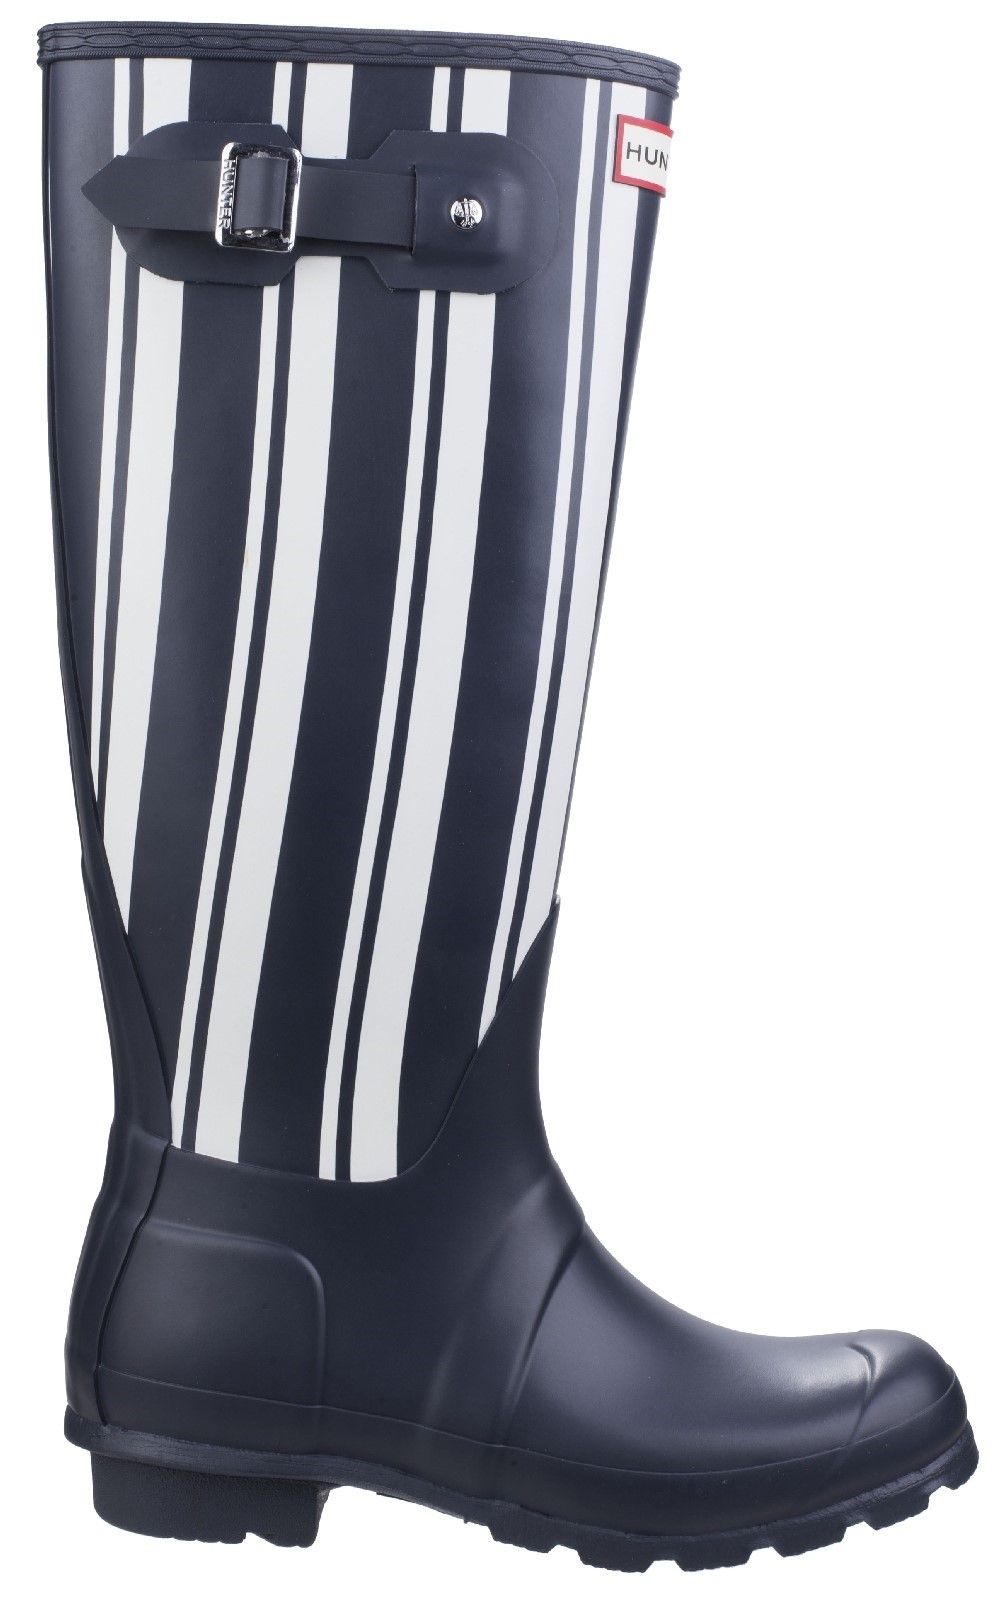 Handcrafted from 28 parts, Hunter's Original Tall Welly is globally recognised as an iconic rain boot. Constructed from natural vulcanised rubber with a unique garden stripe print Fun and practical wellington Fully waterproof Polyester lining and non slip rubber sole.